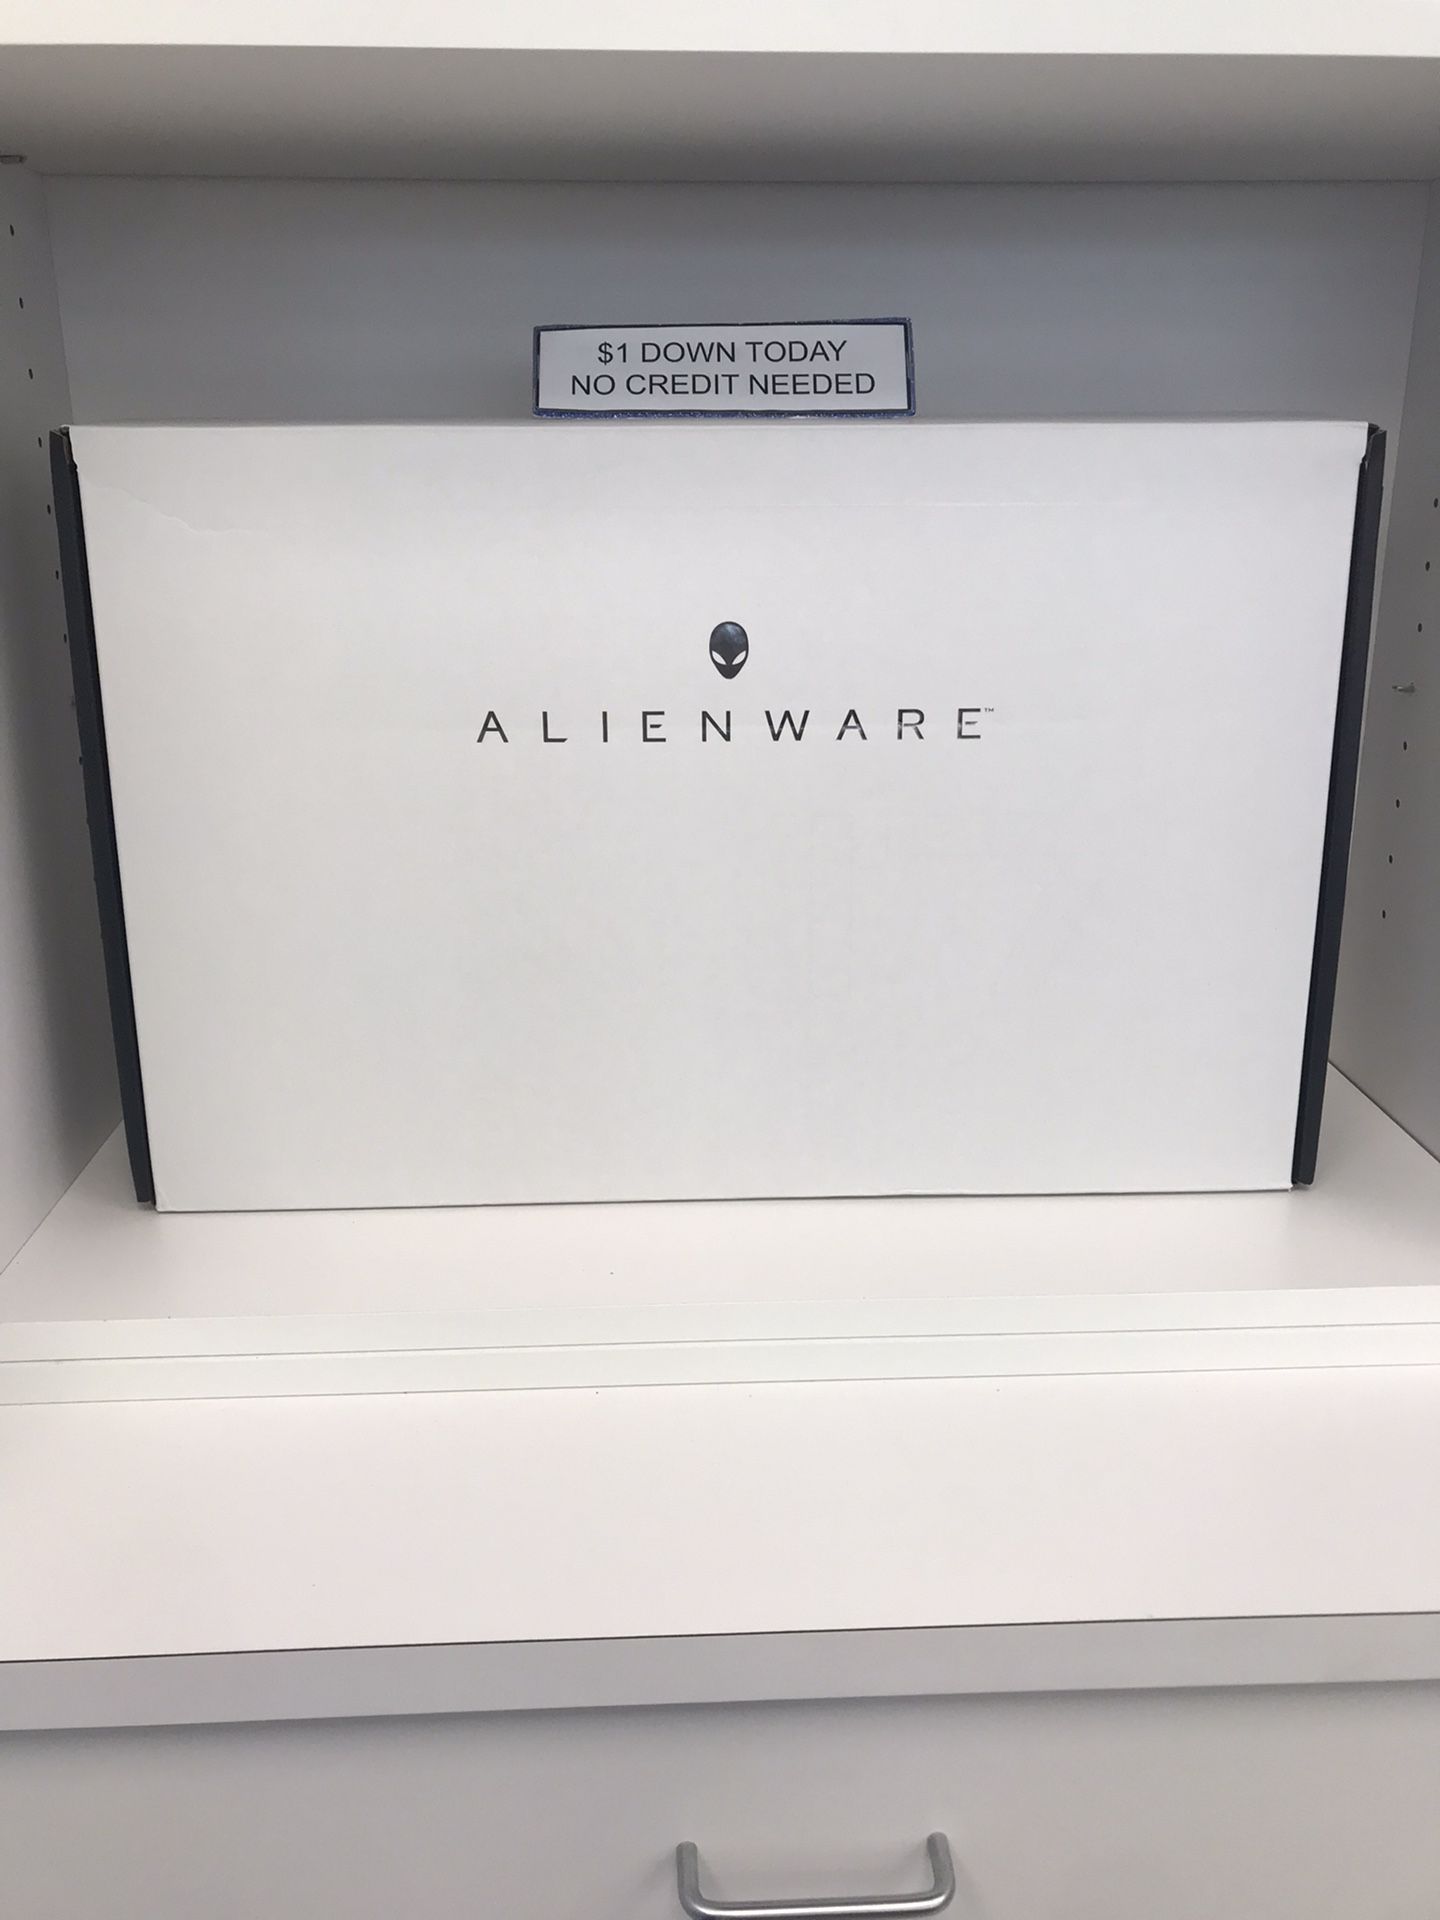 Alienware M17 R5 17.3 FHD 360HZ Gaming Laptop - Pay $1 Today to Take it Home and Pay the Rest Later!